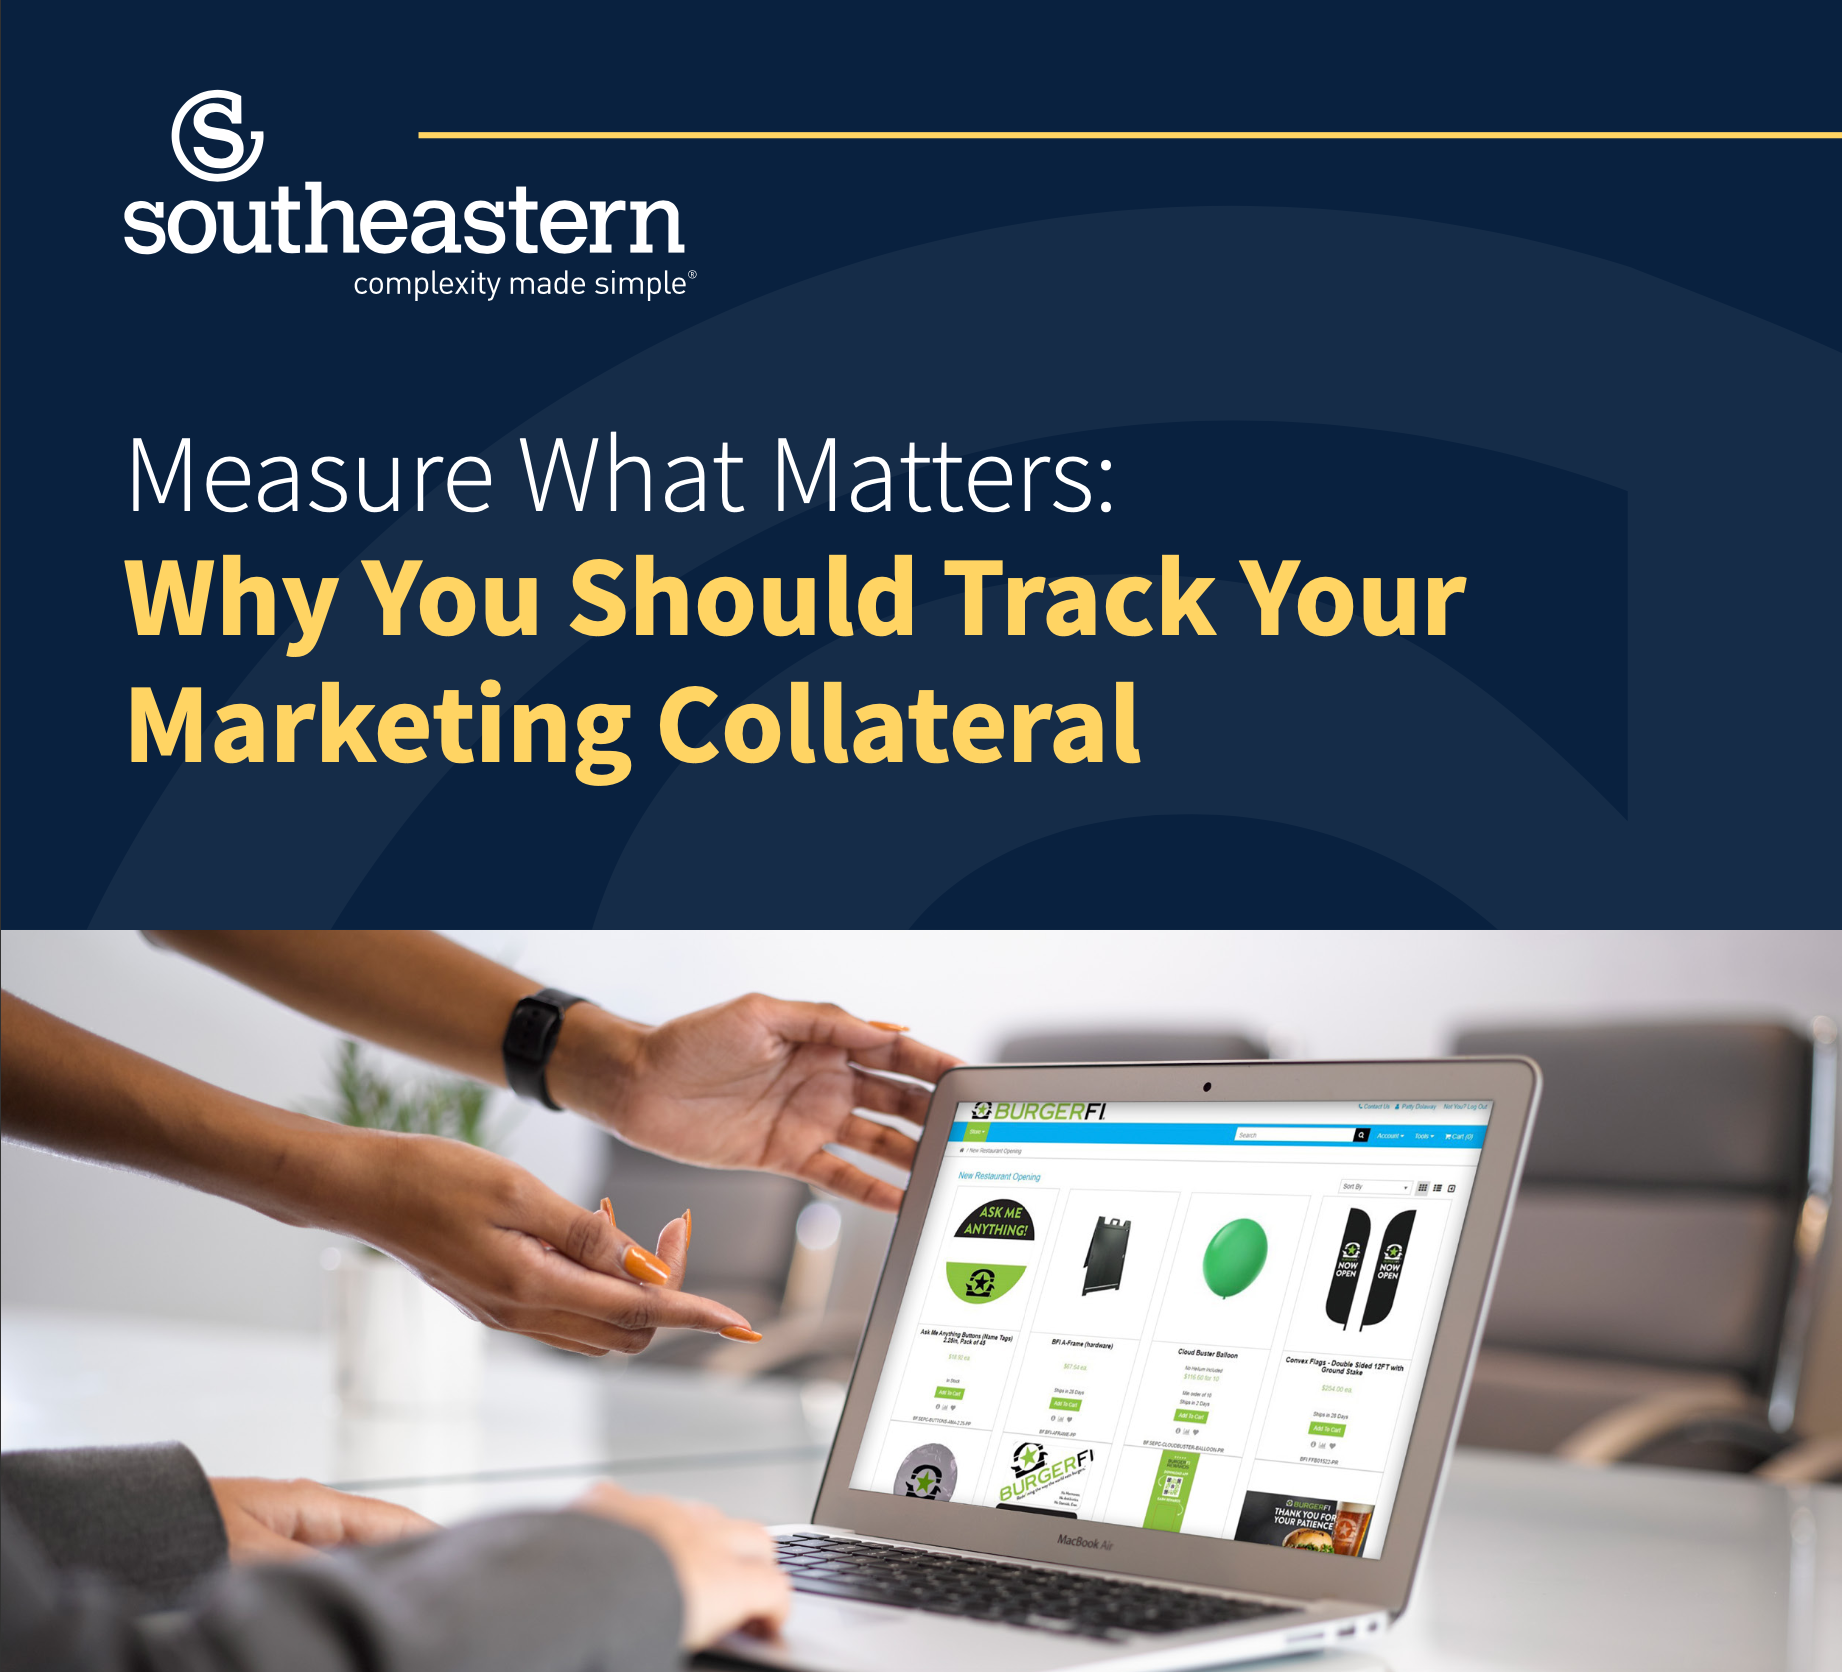 Measure What Matters: Why You Should Track Your Marketing Collateral